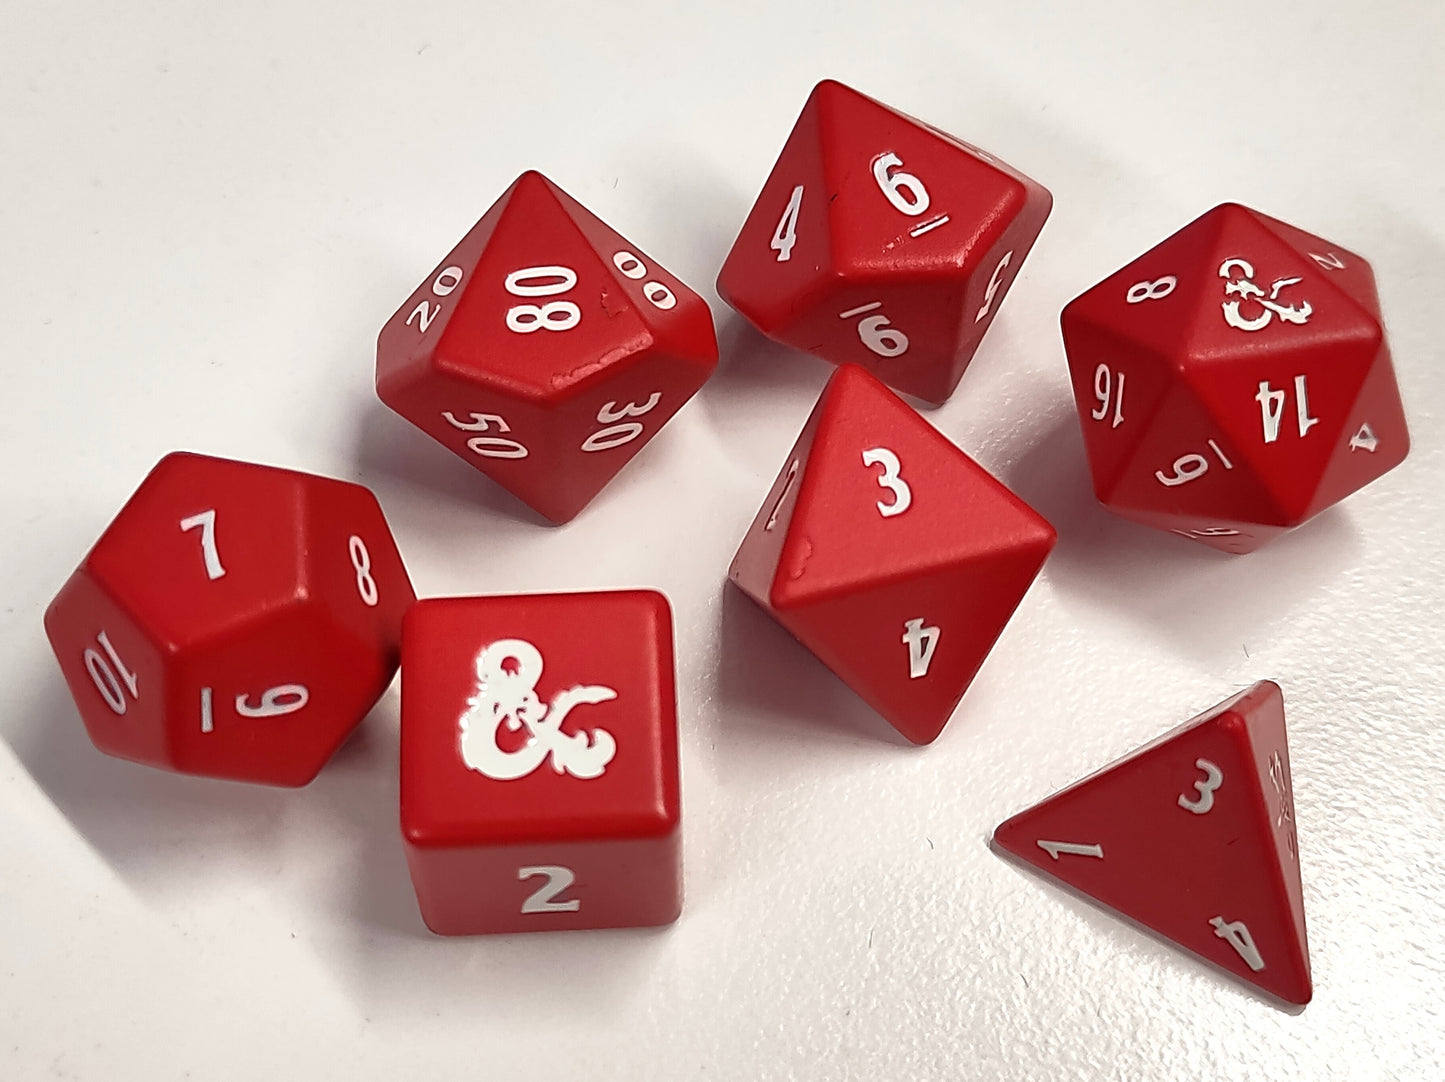 Battle Scarred - D&D Heavy metal polydice set, red w/white